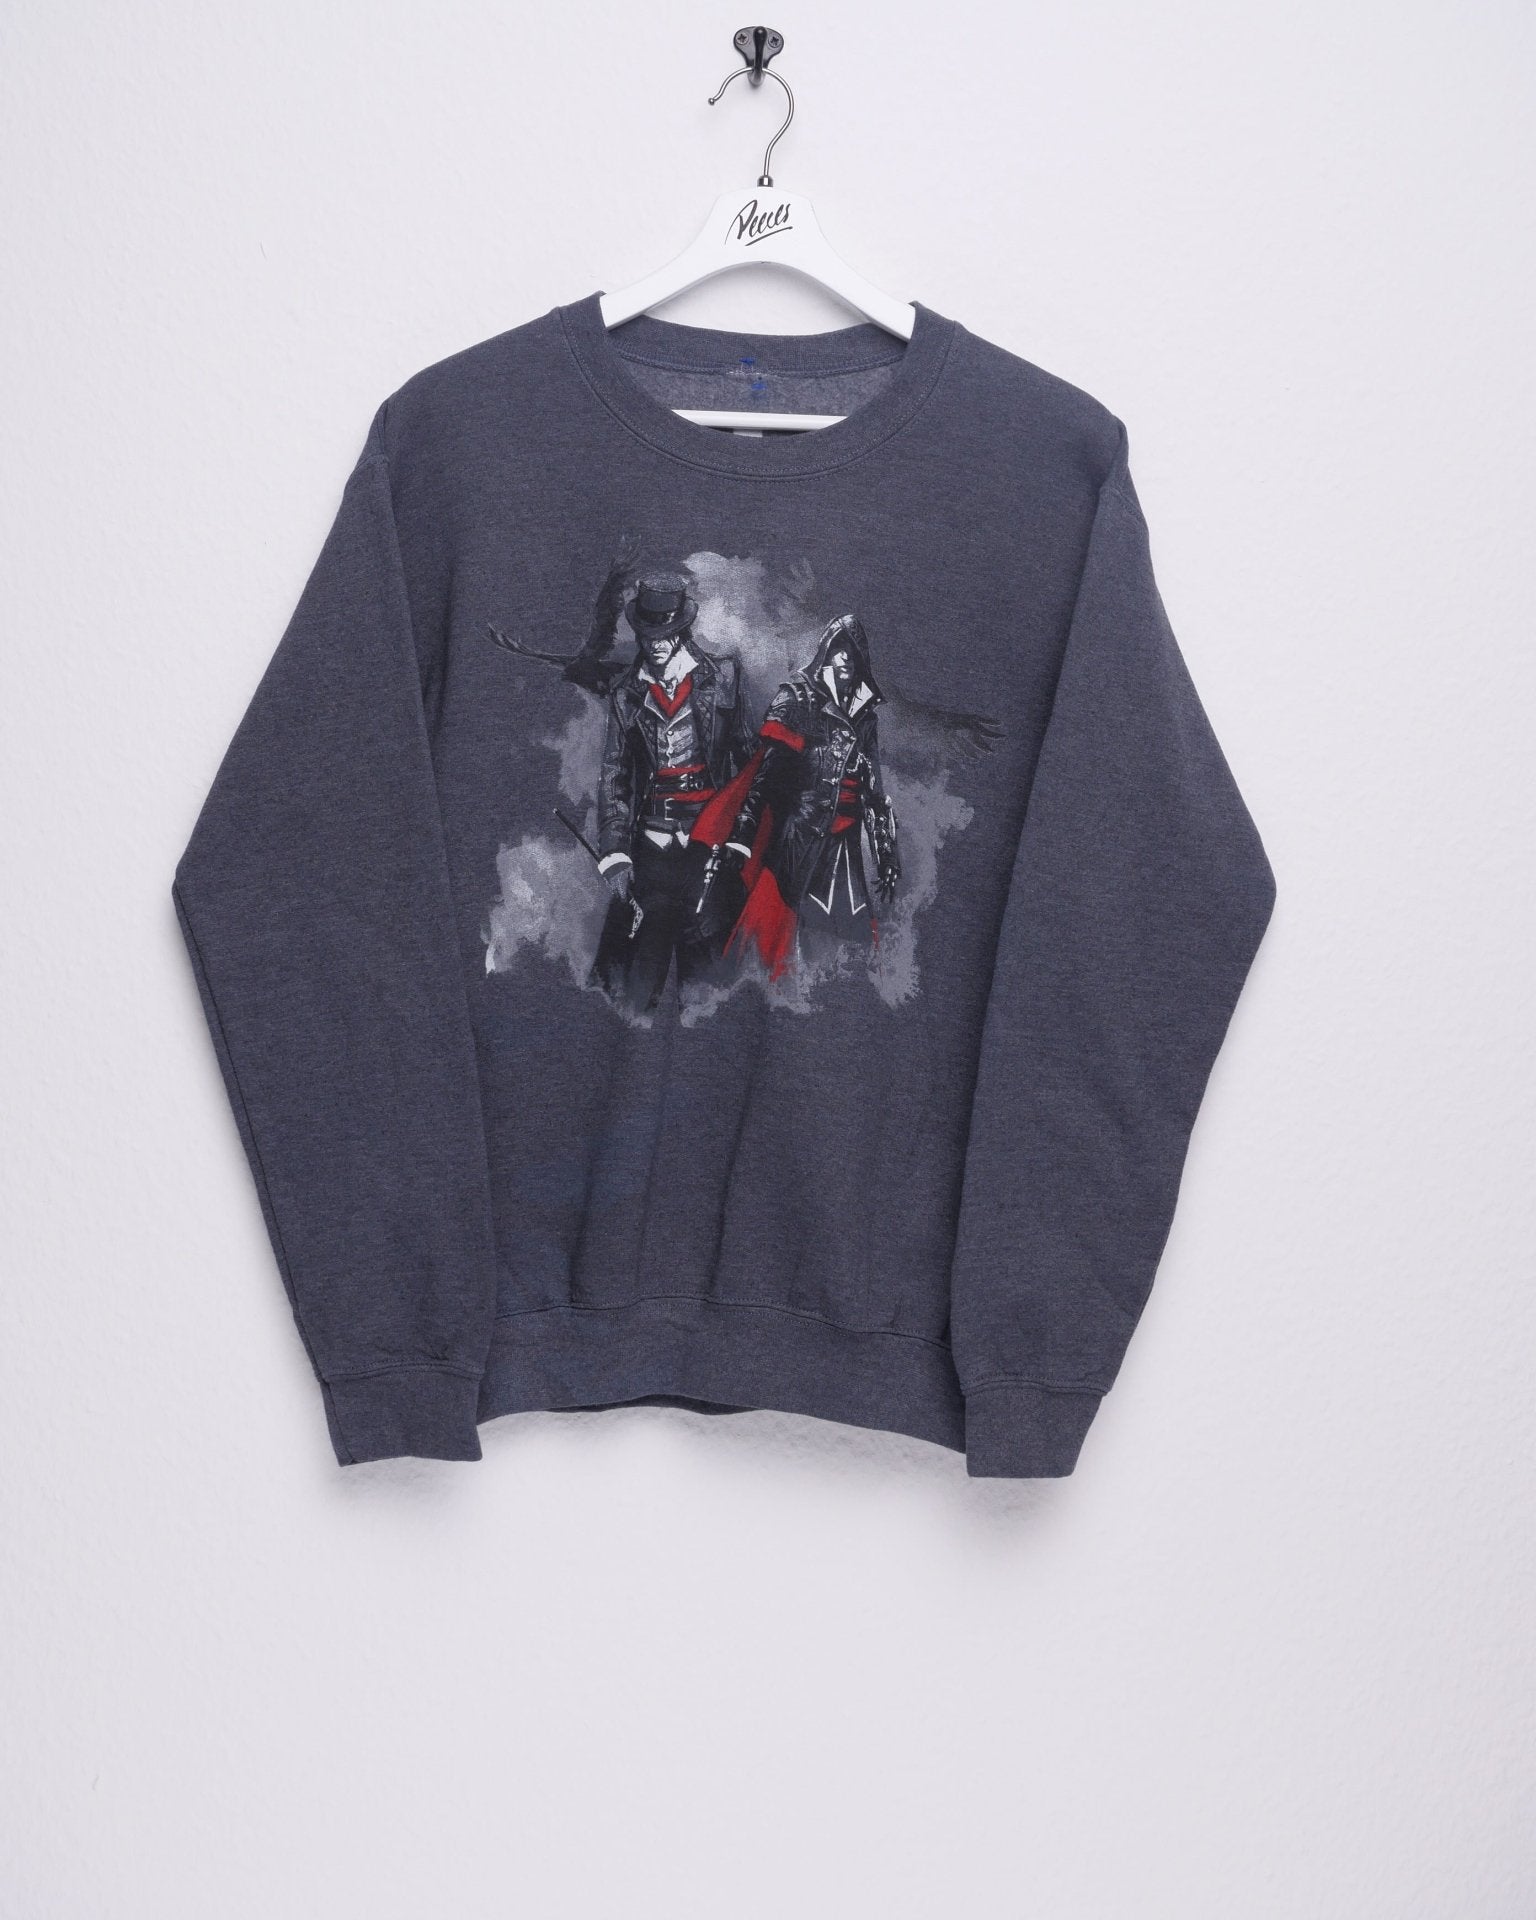 Assassins Creed printed Graphic Sweater - Peeces